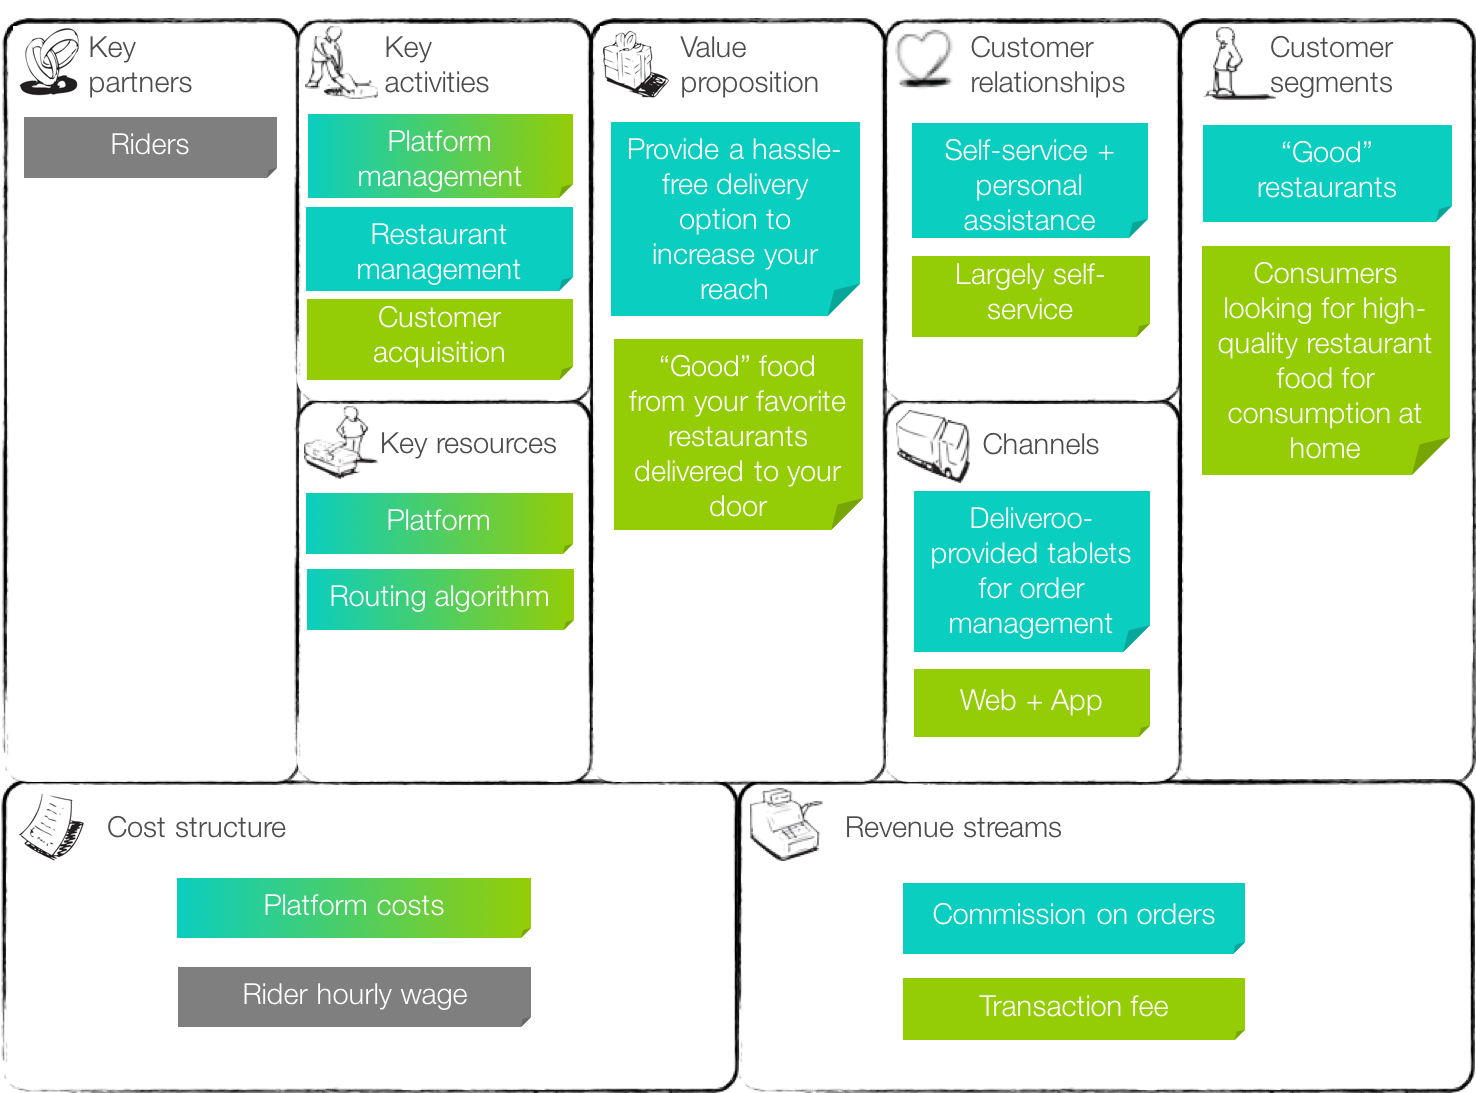 Deliveroo Business Model Canvas - 14 Ways to Apply the Business Model Canvas - Minty Webs - Instead, the bmc is used to summarize and visually illustrate the most important information of a business model, and to provide centralized ongoing clarity.